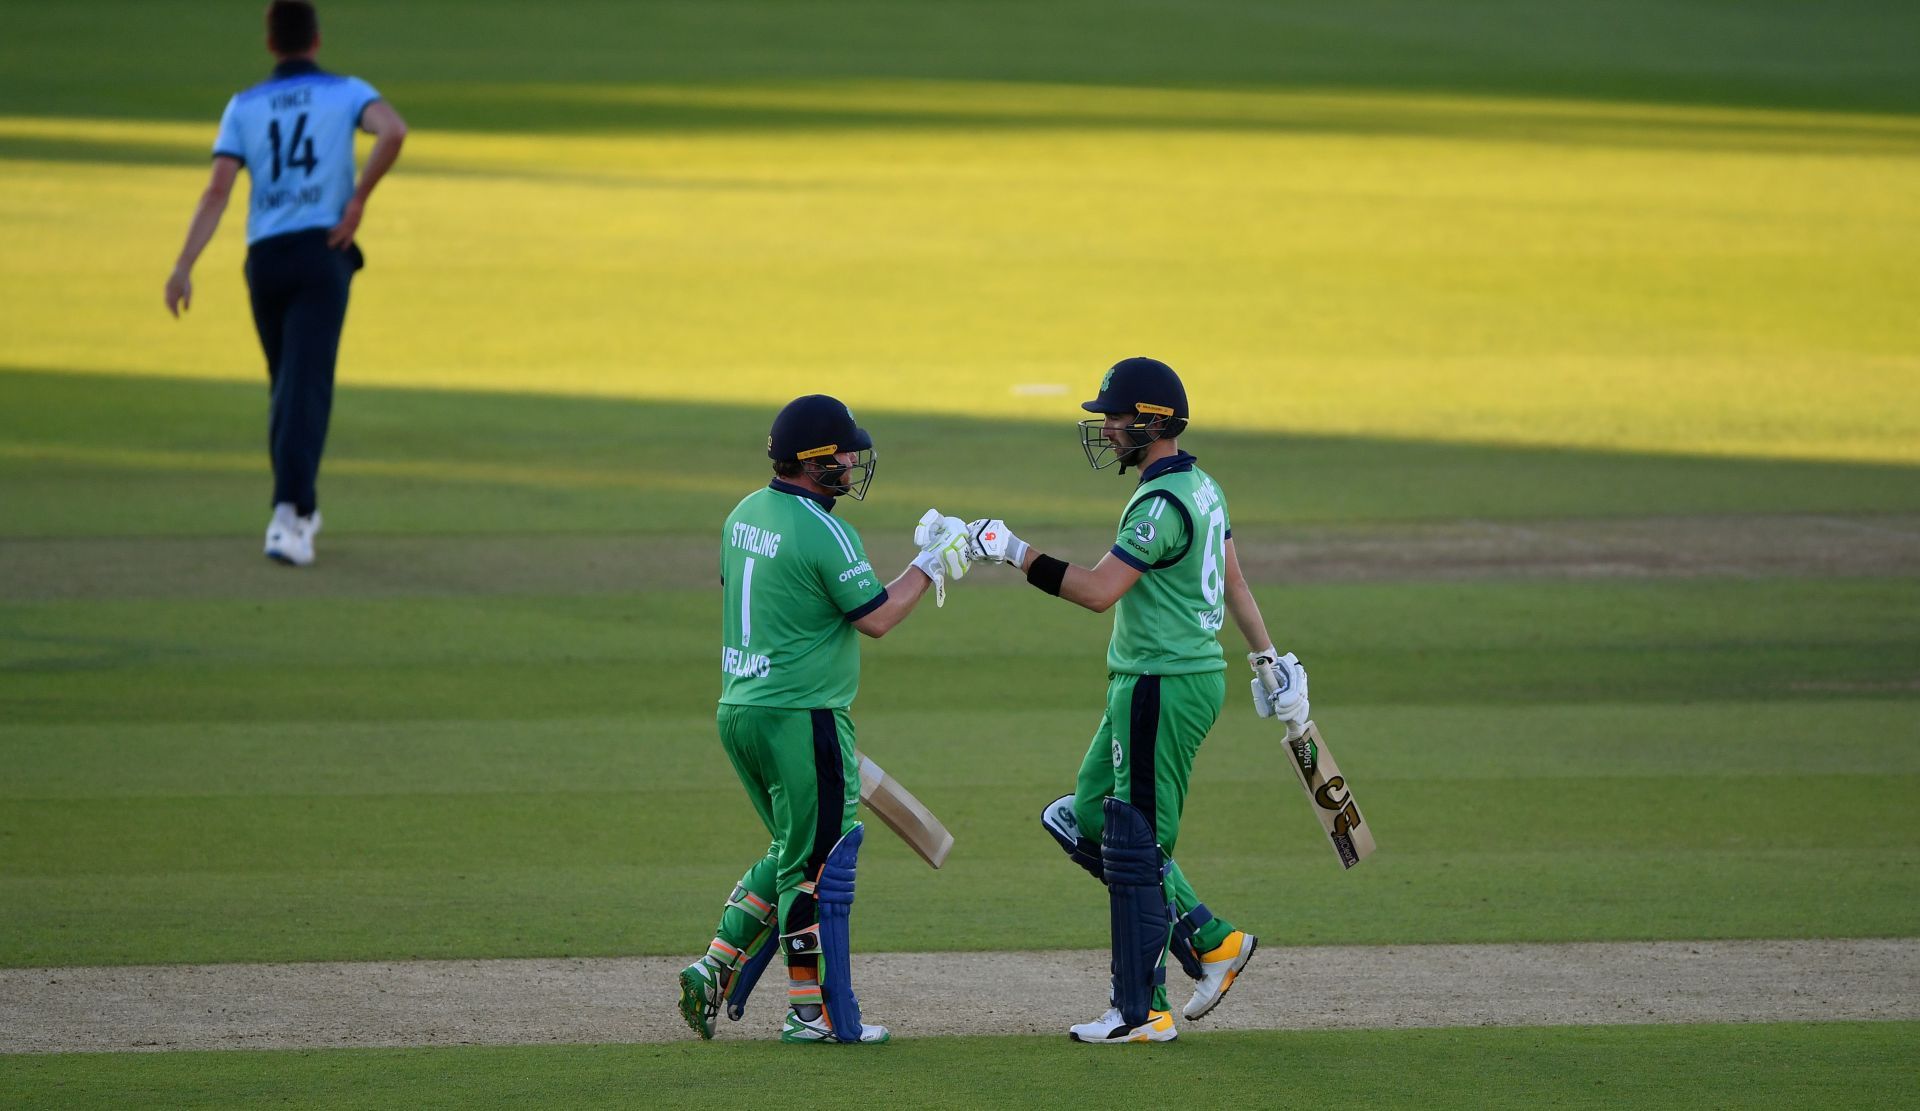 Andrew Balbirnie (R) will lead Ireland in the two T20Is against India in Malahide.